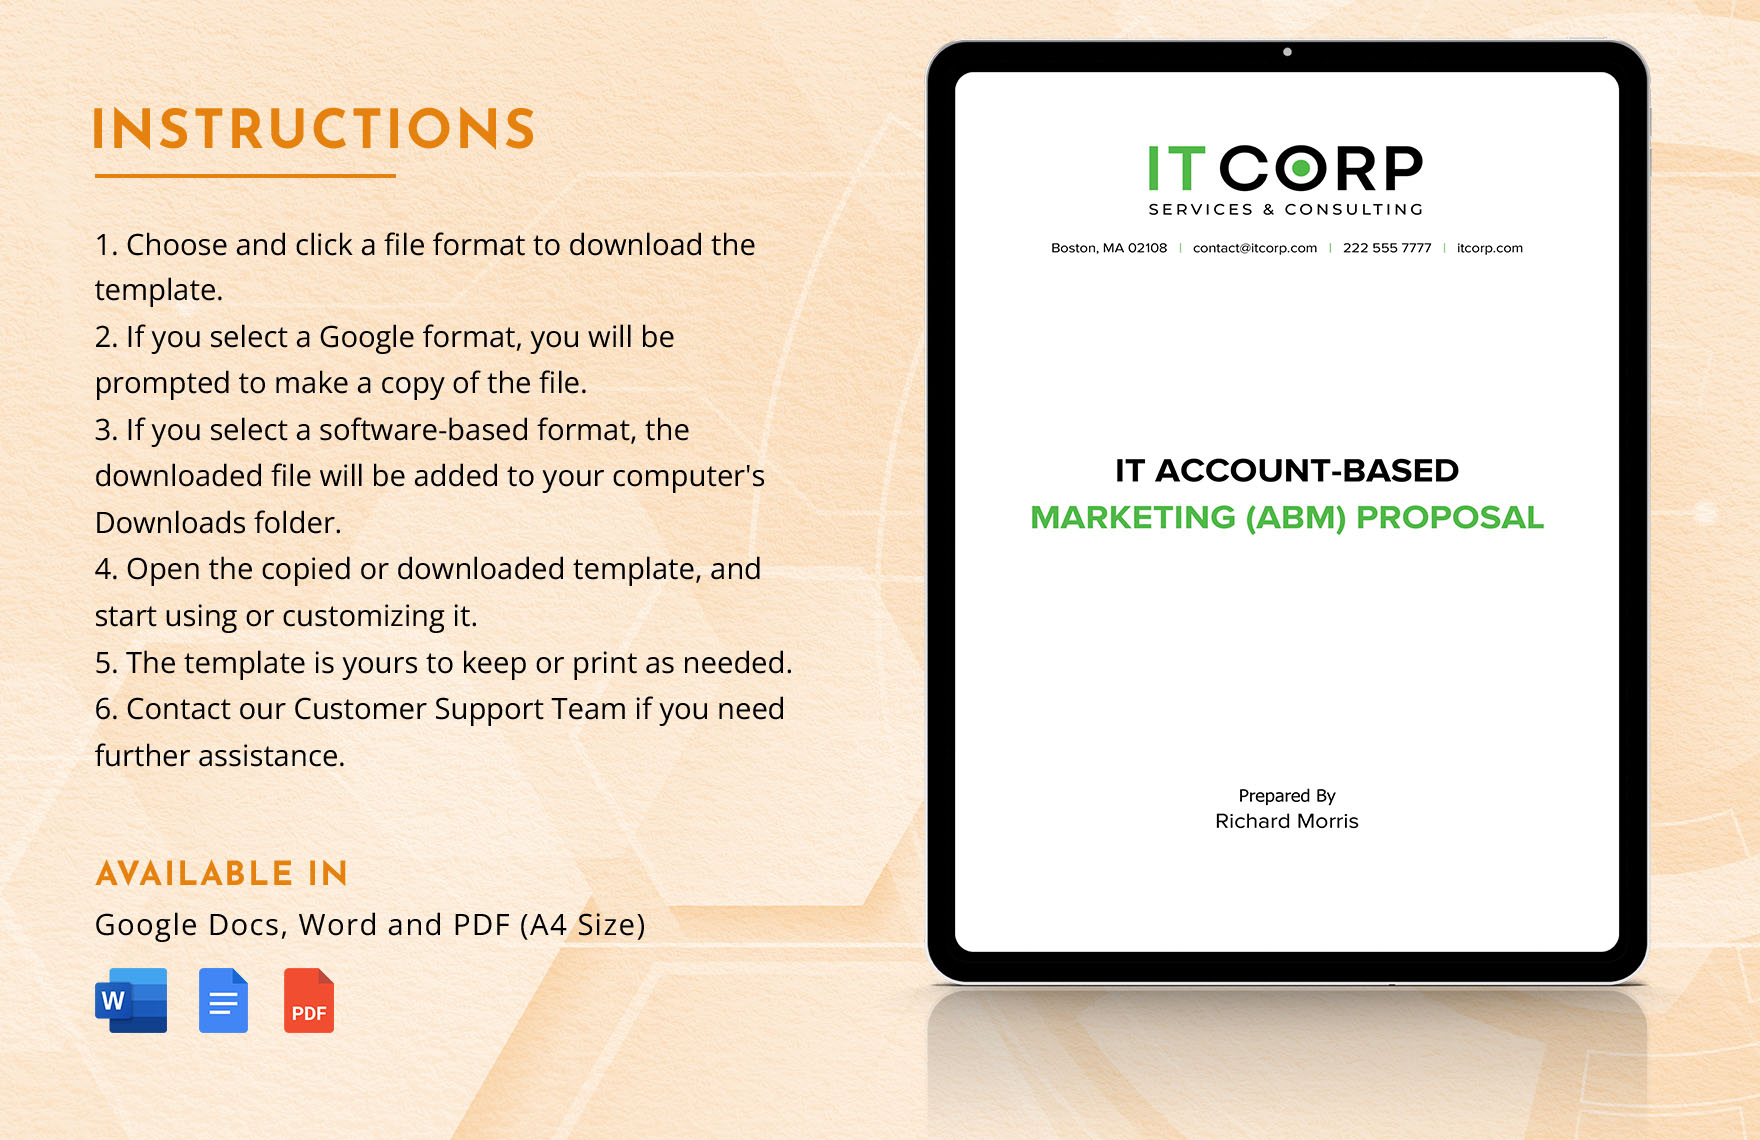 IT Account-Based Marketing (ABM) Proposal Template